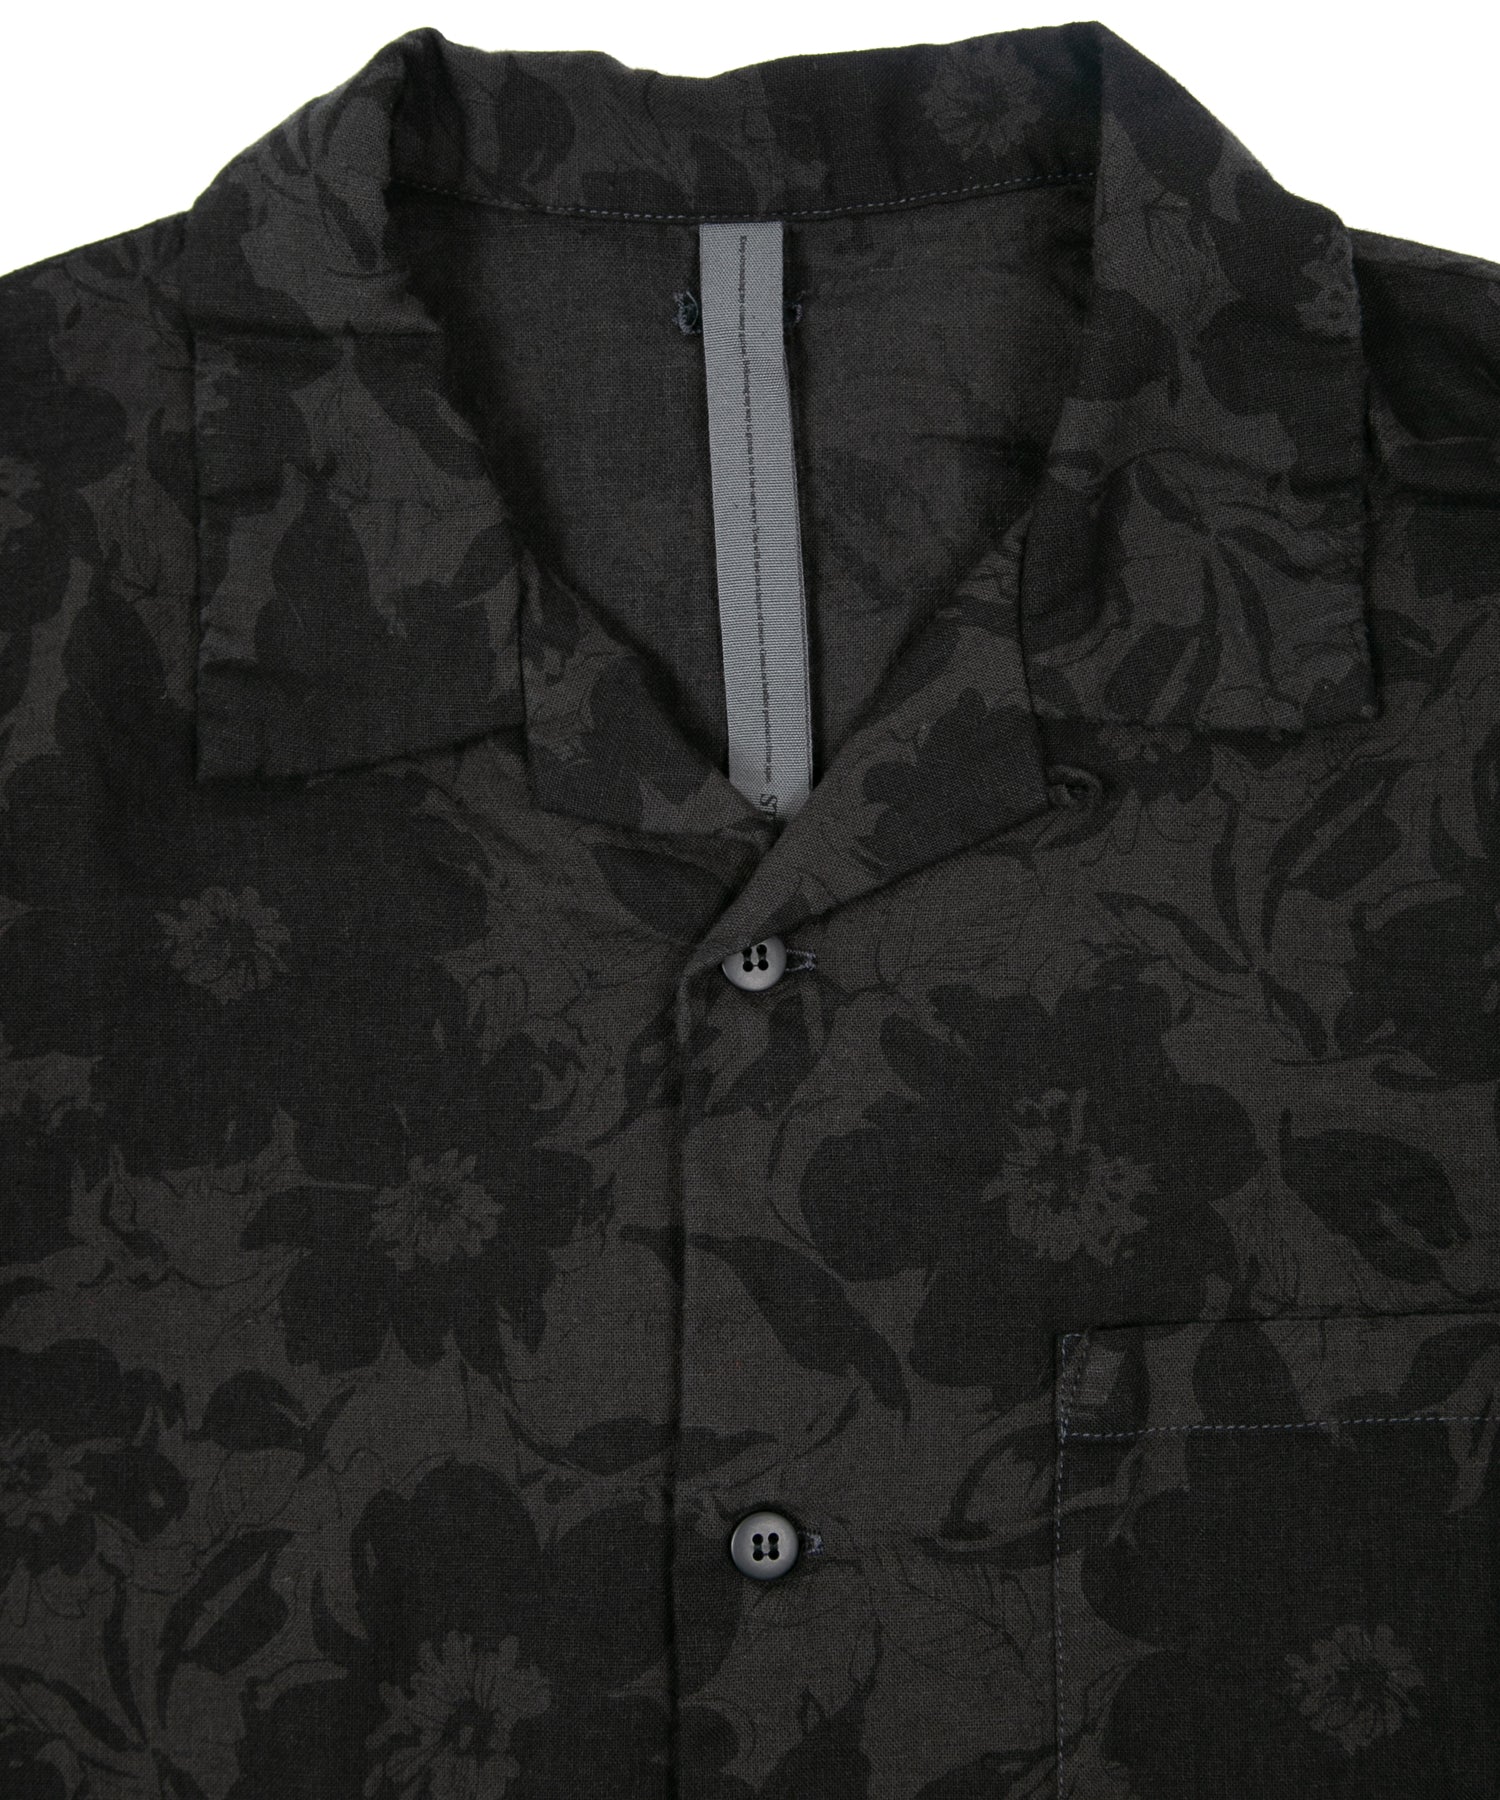 Load image into Gallery viewer, Flower Printed Cotton Linen Open-necked Short-Sleeve Shirts - GRAY×BLACK